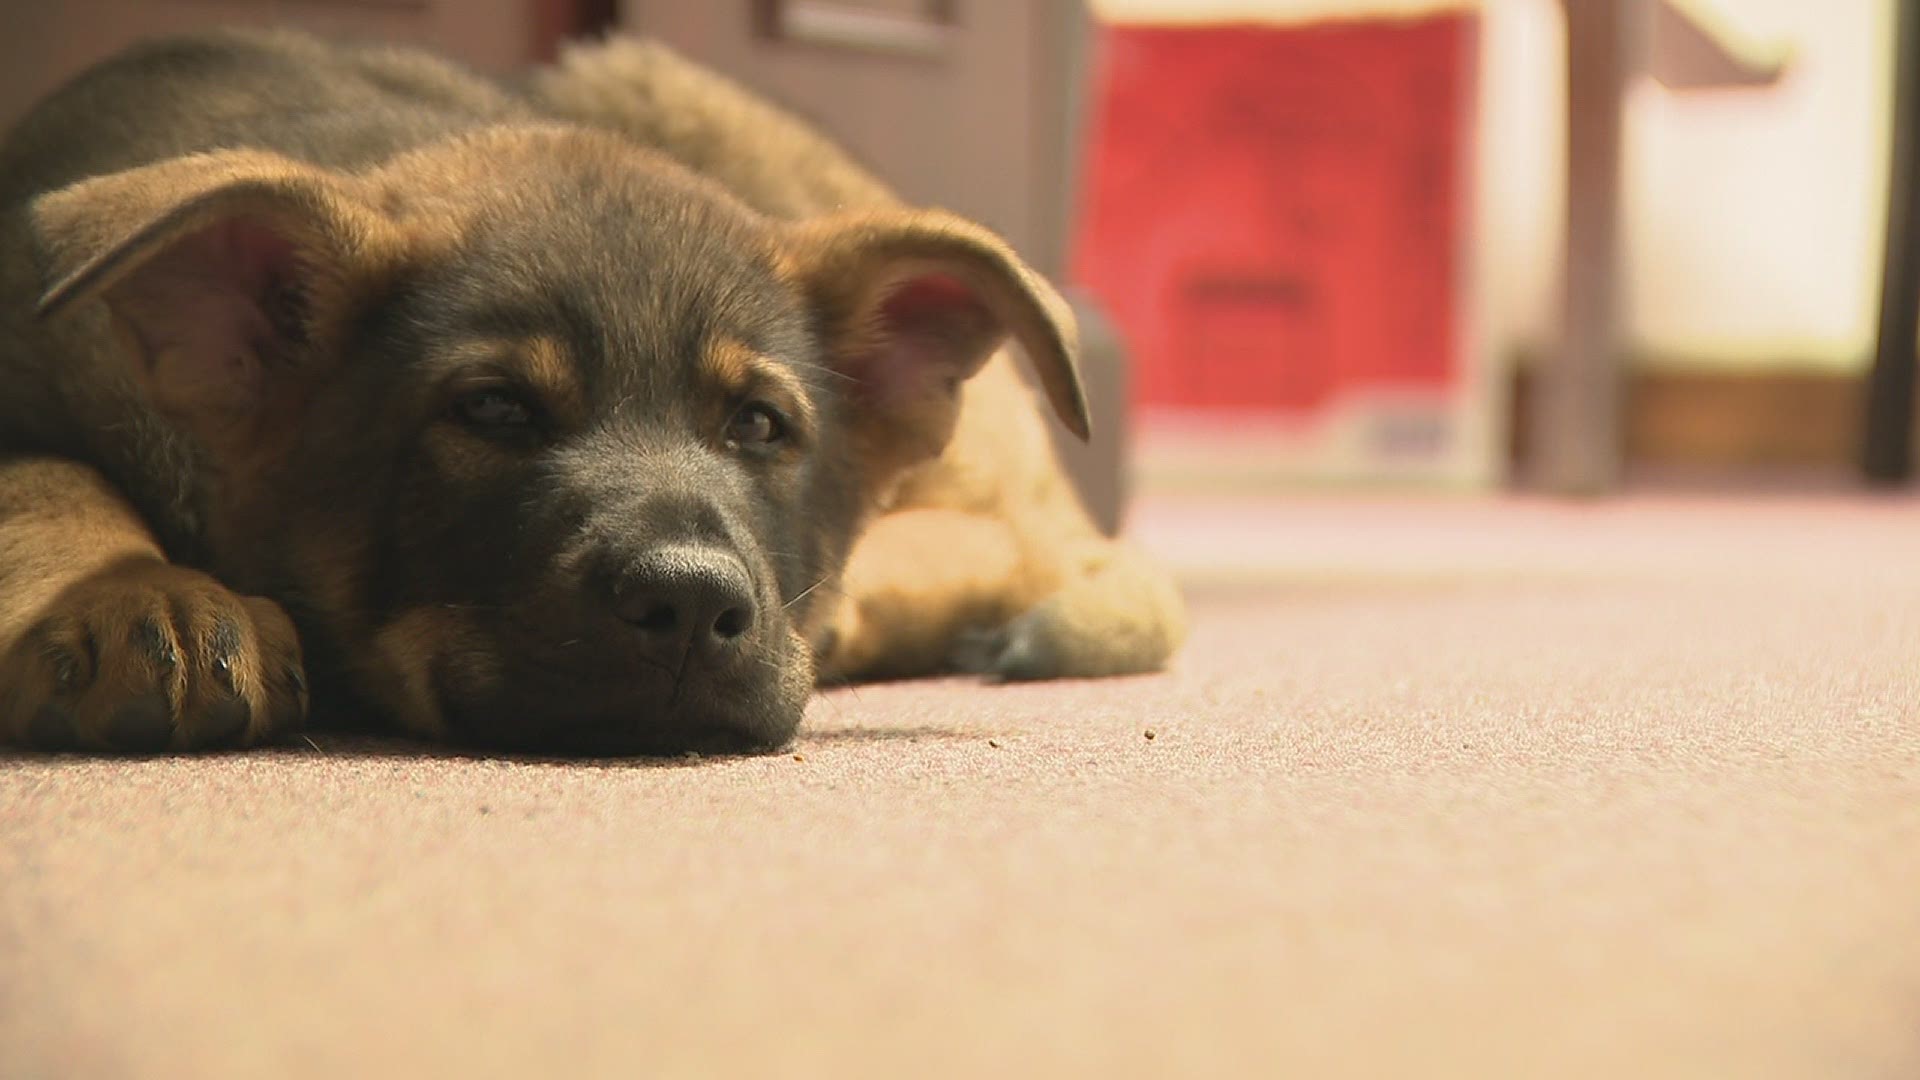 He may be a little furrier than the other officers, but the police department expects King to be just as tough.